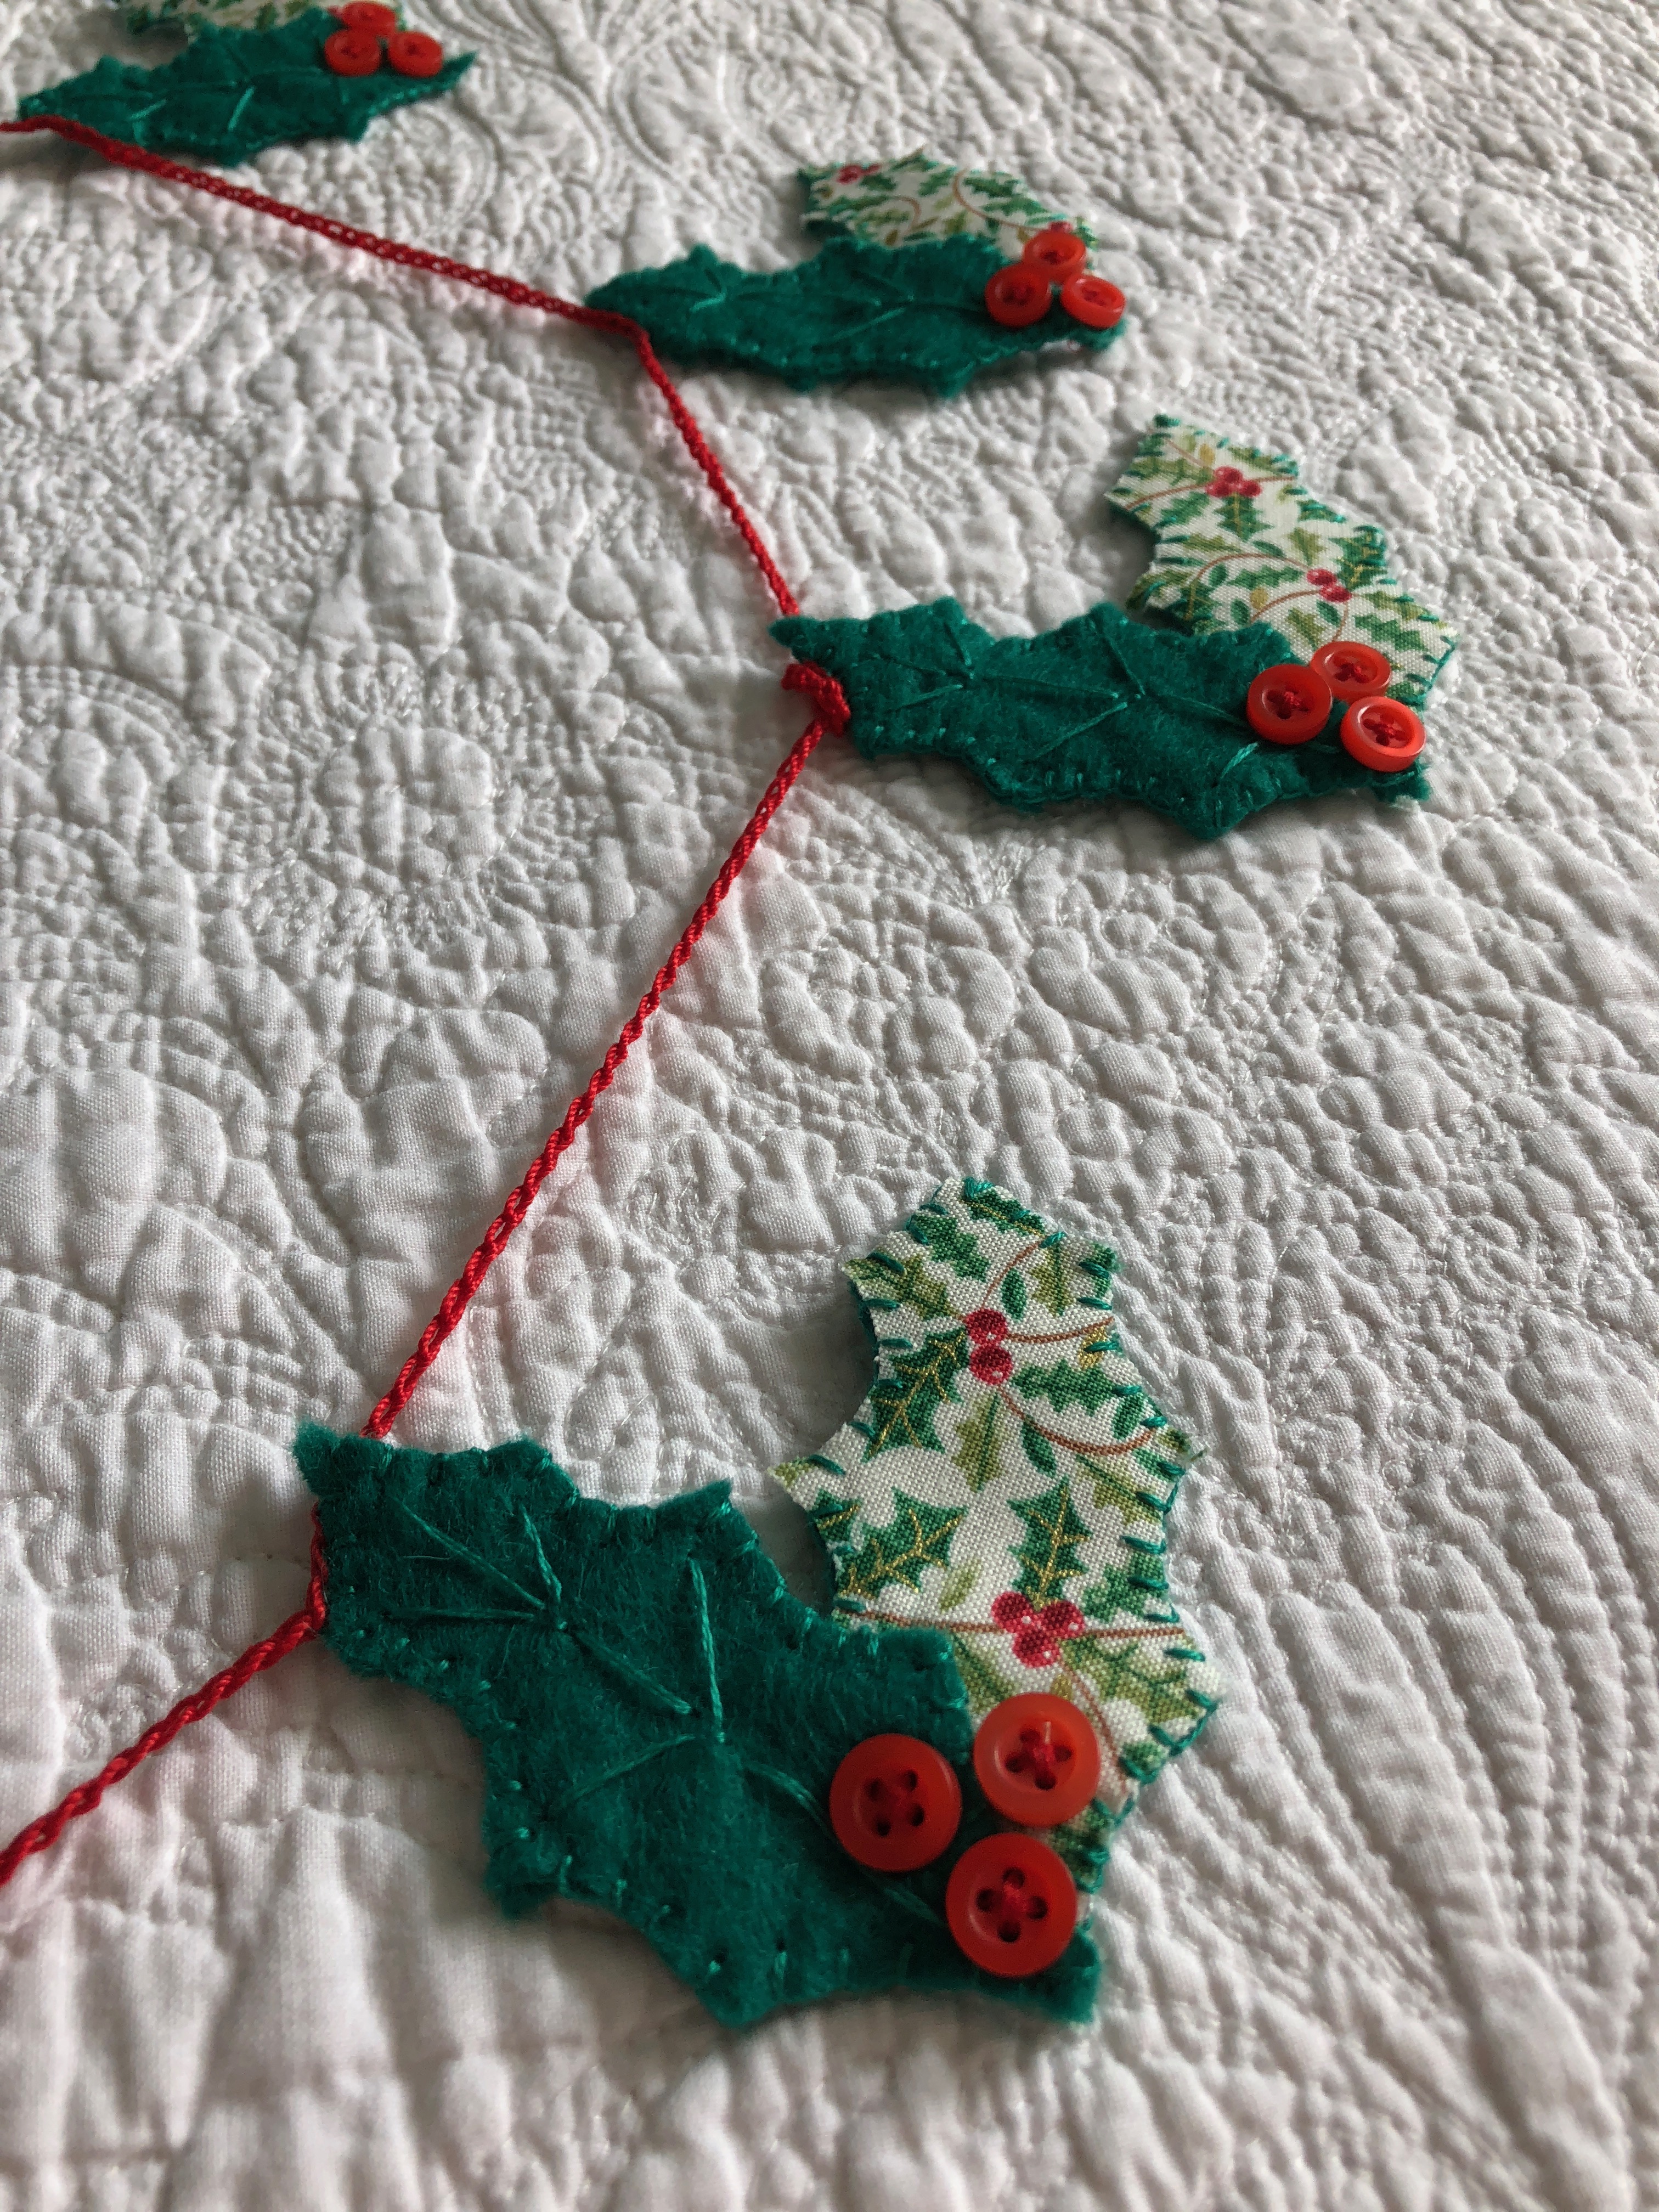 A handmade, hand stitched garland of green felt and holly printed cotton fabric holly leaves with red button berries.